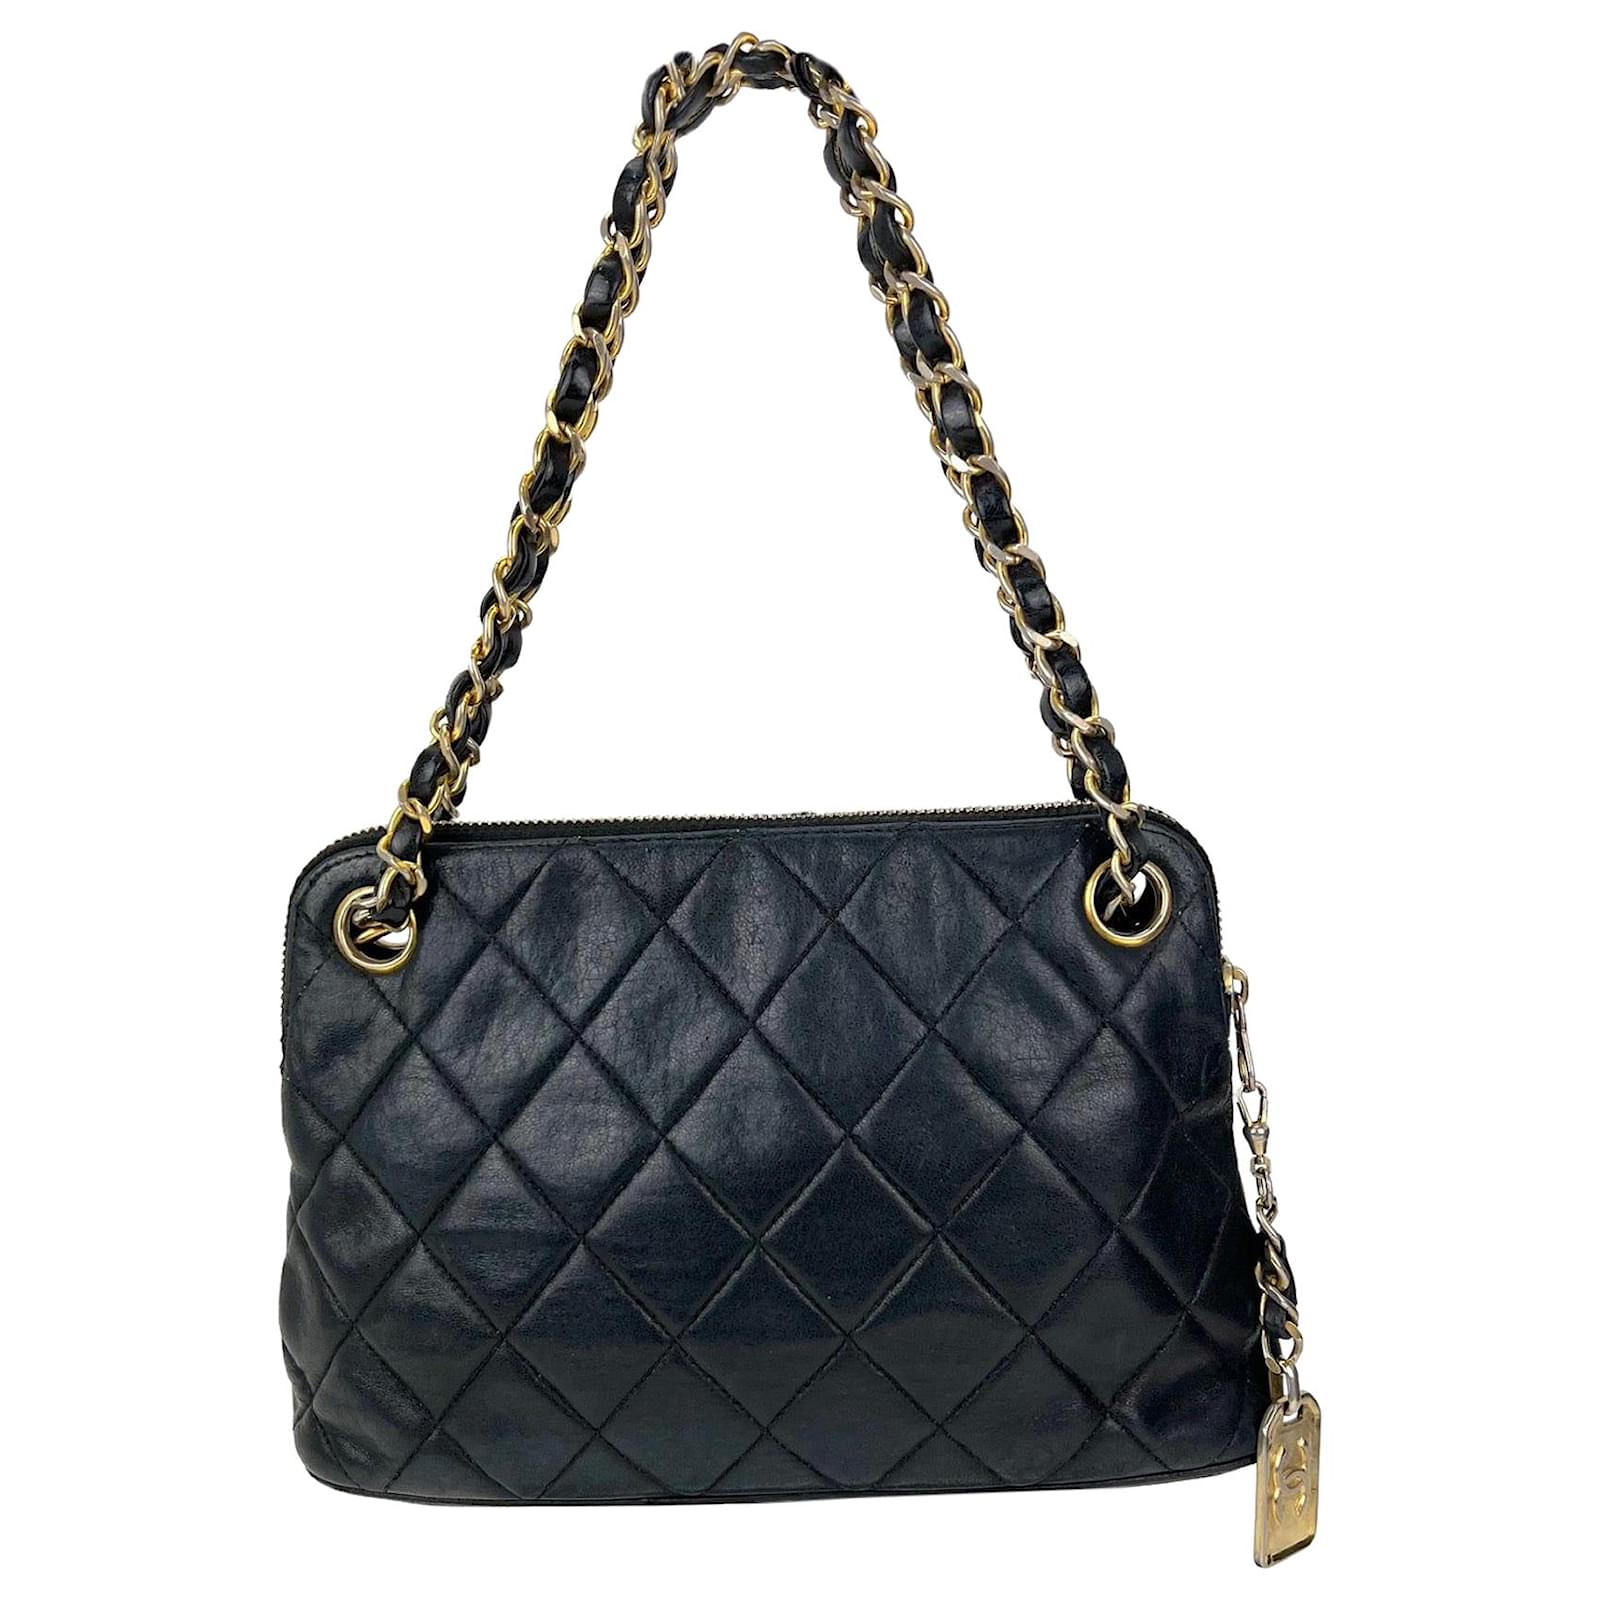 CHANEL Bag Quilted Lambskin Leather Chain Vintage Black Mini